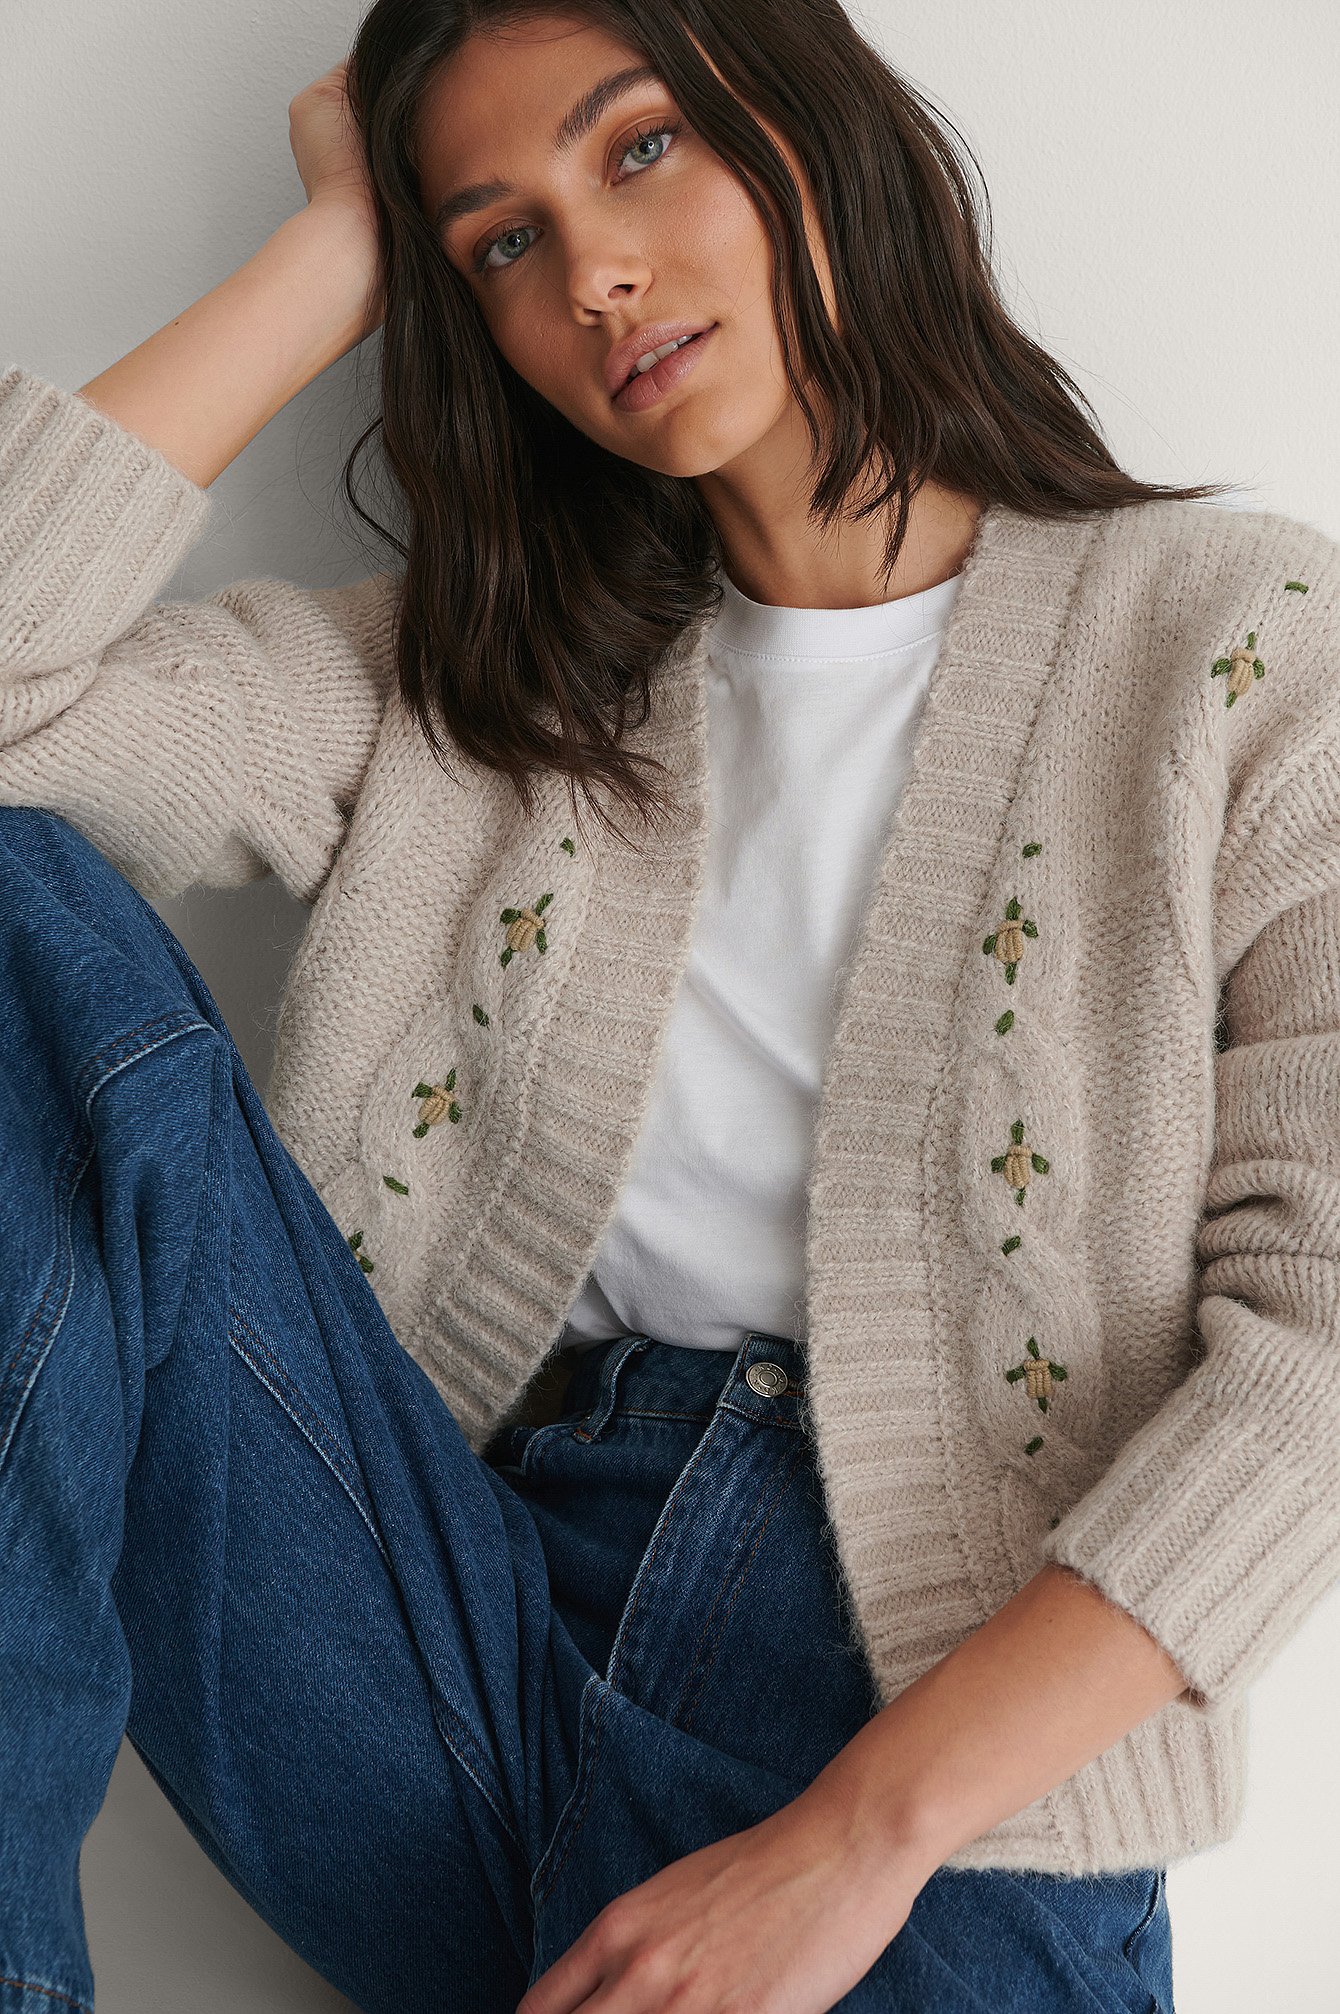 Grey Flower Embroidery Knitted Cardigan